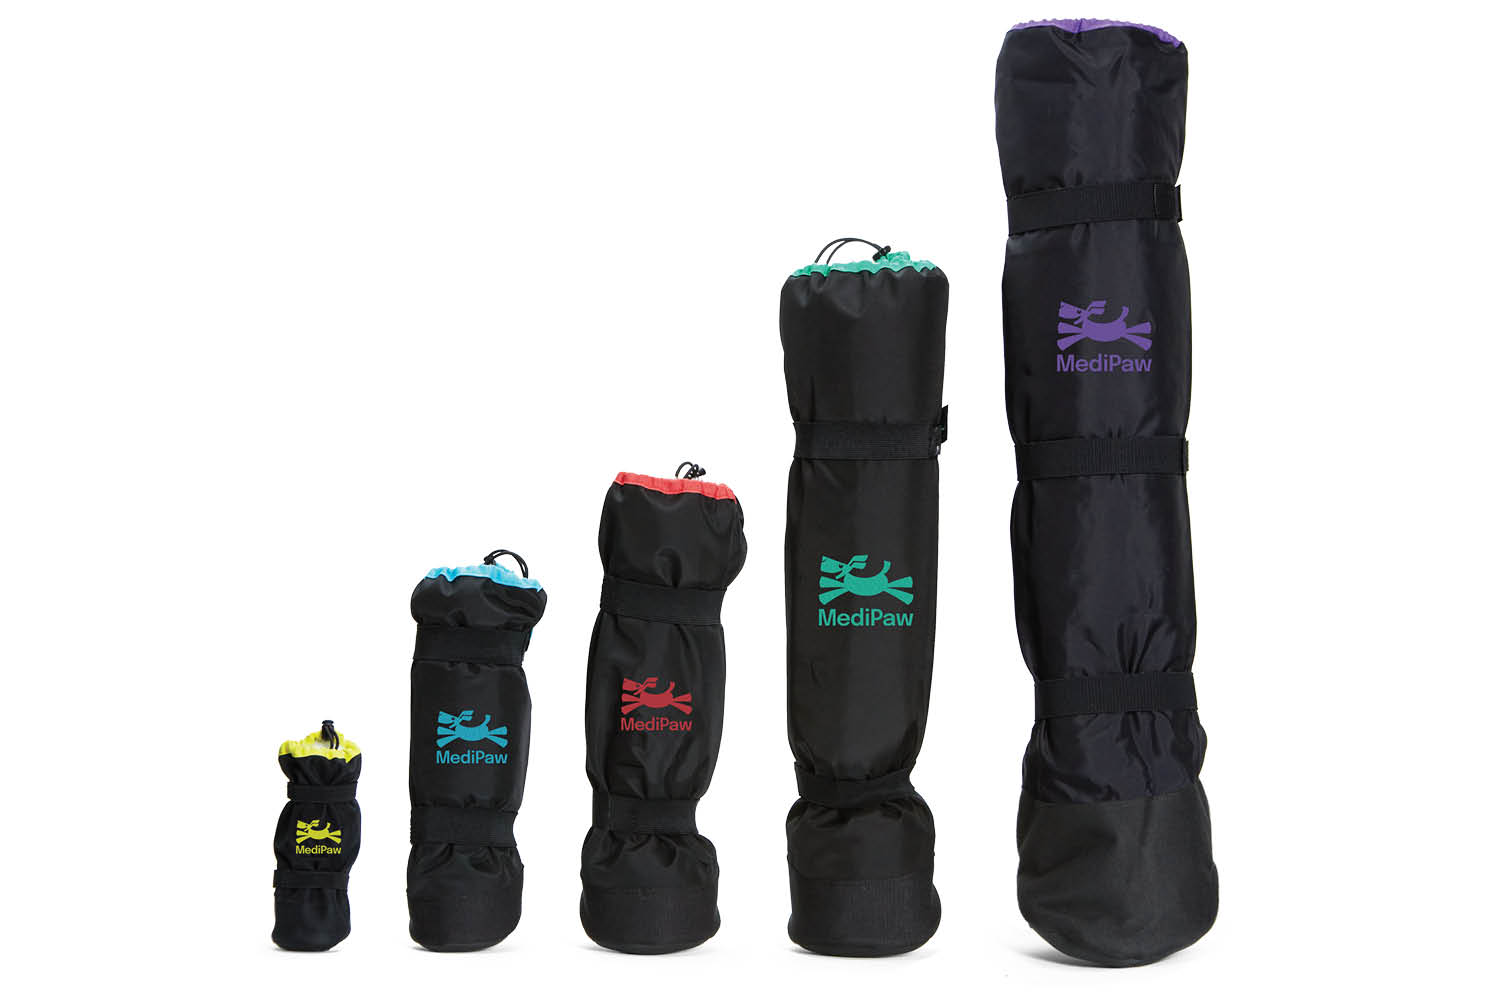 A group of bags with different colors and designs, including Your Whole Dog's MediPaw: Soft Bandage (Basic) Boot items.